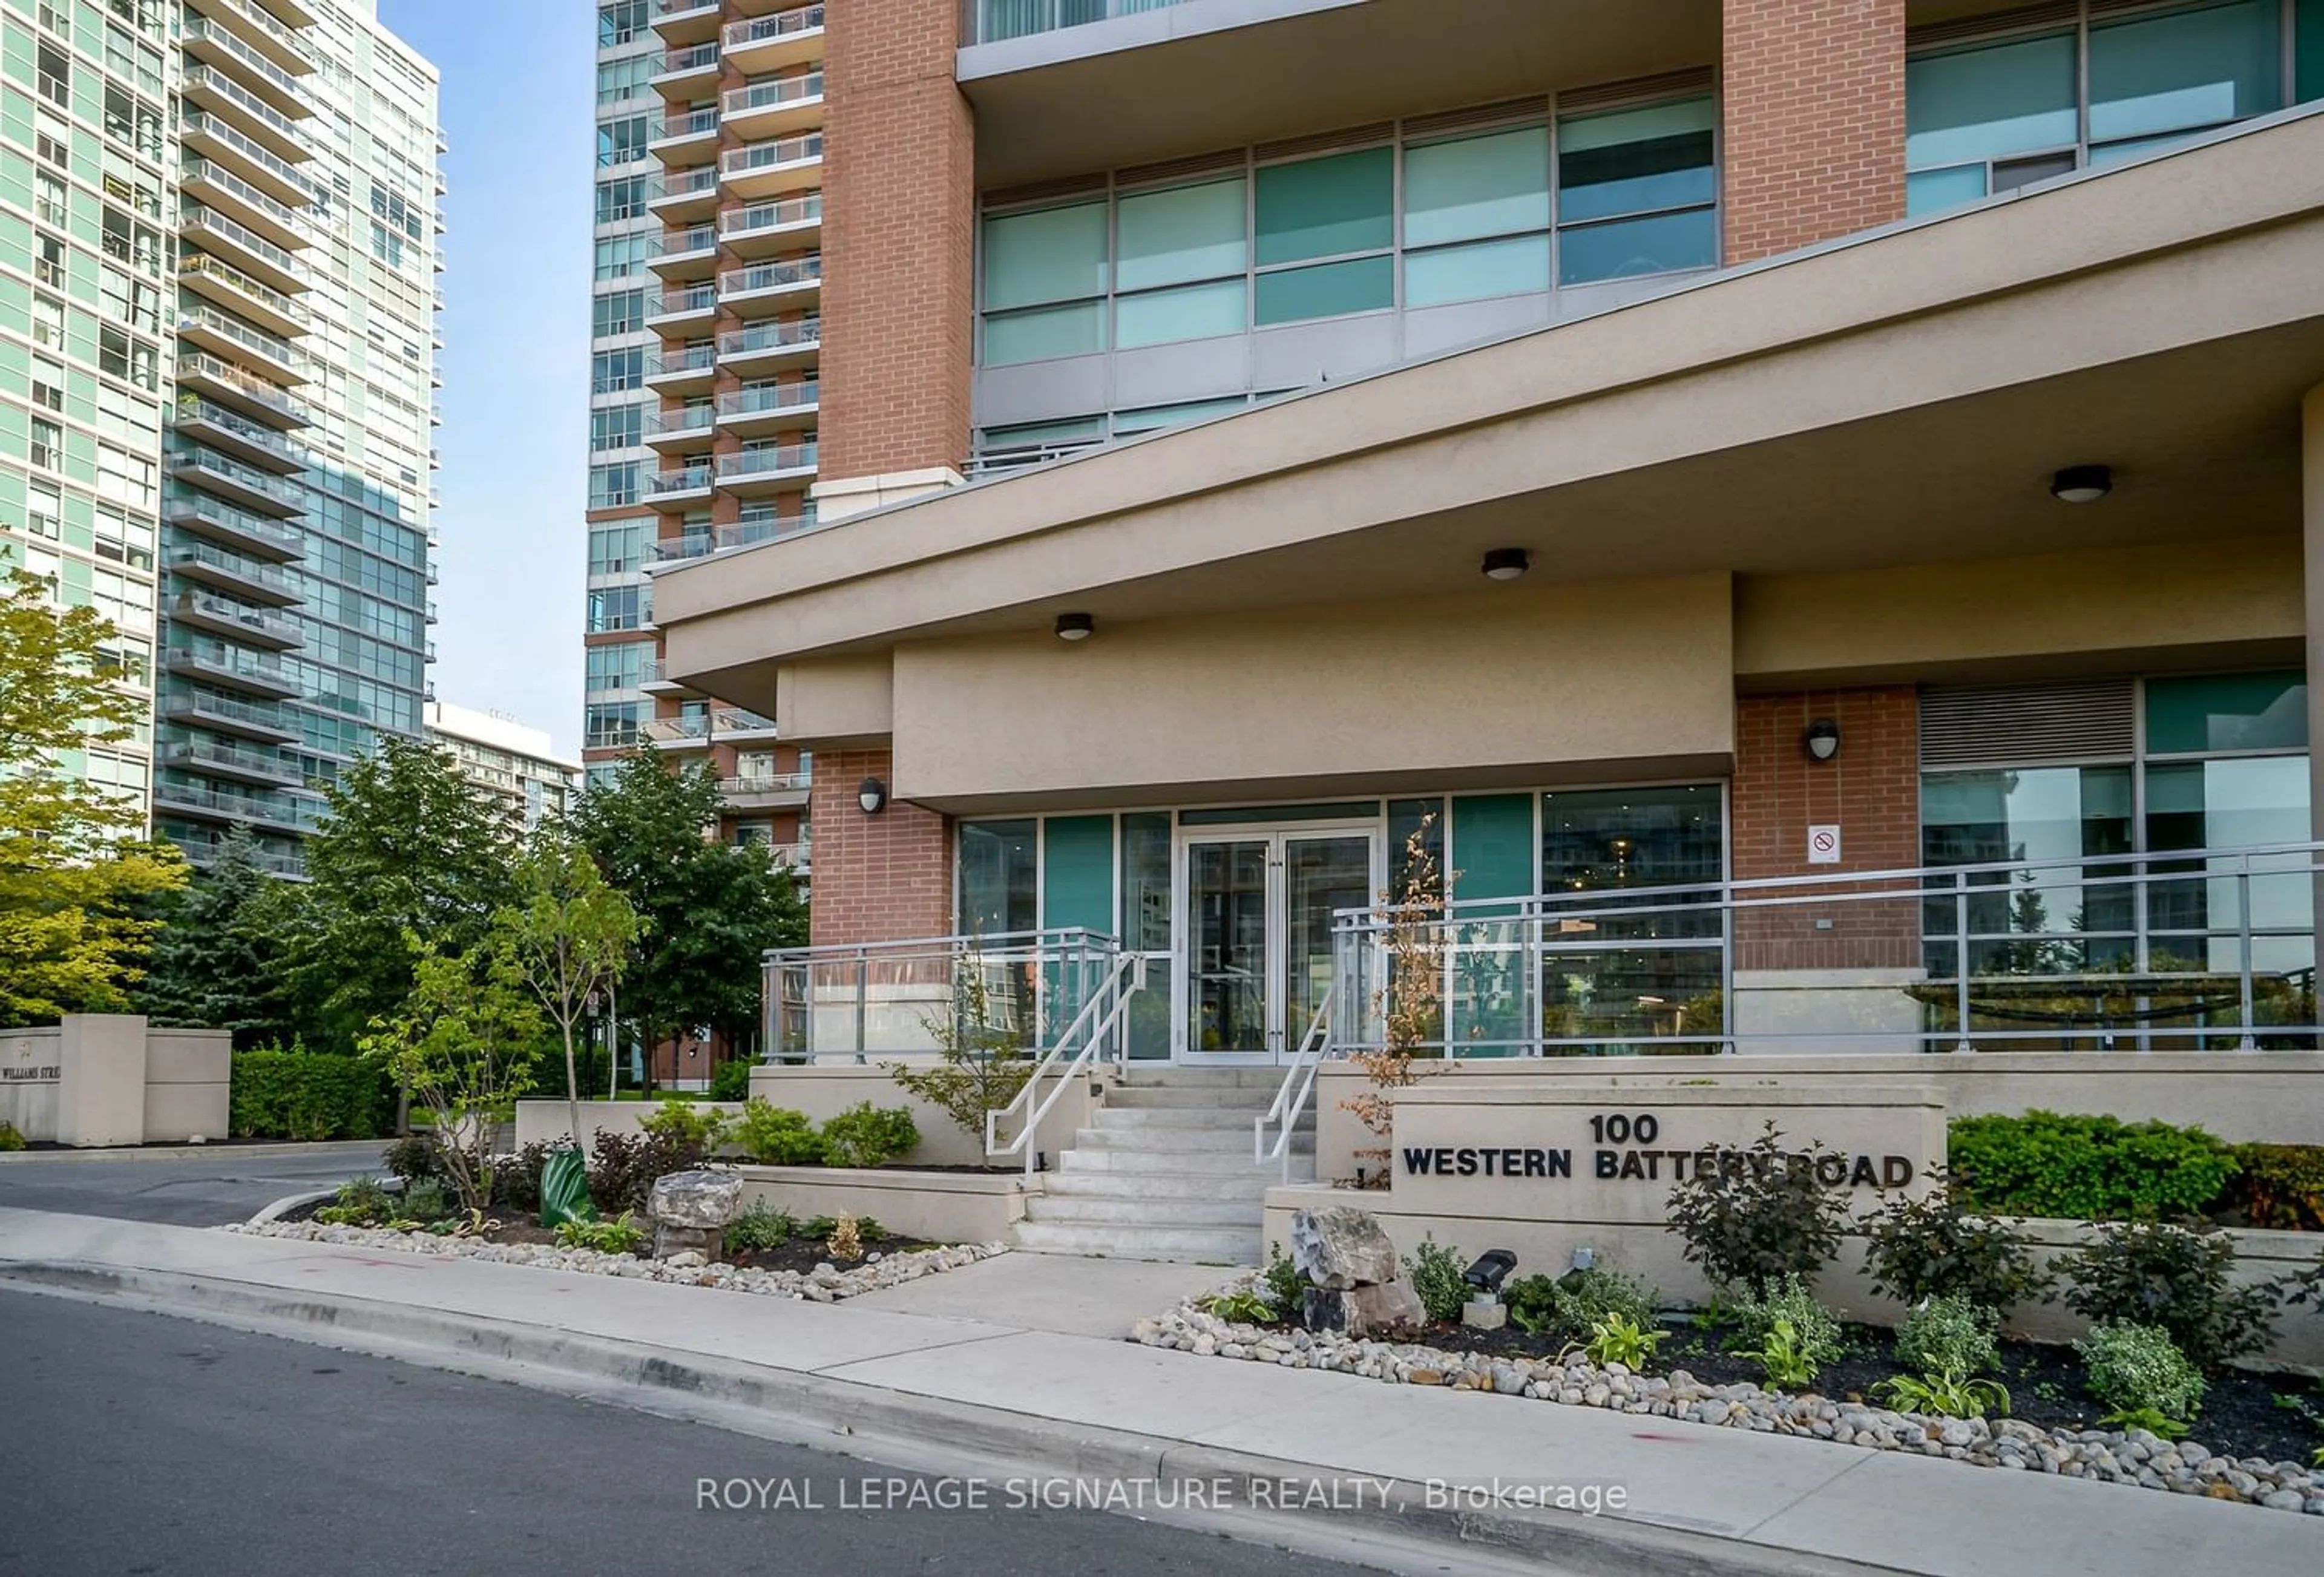 A pic from exterior of the house or condo for 100 Western Battery Rd #612, Toronto Ontario M6K 3S2